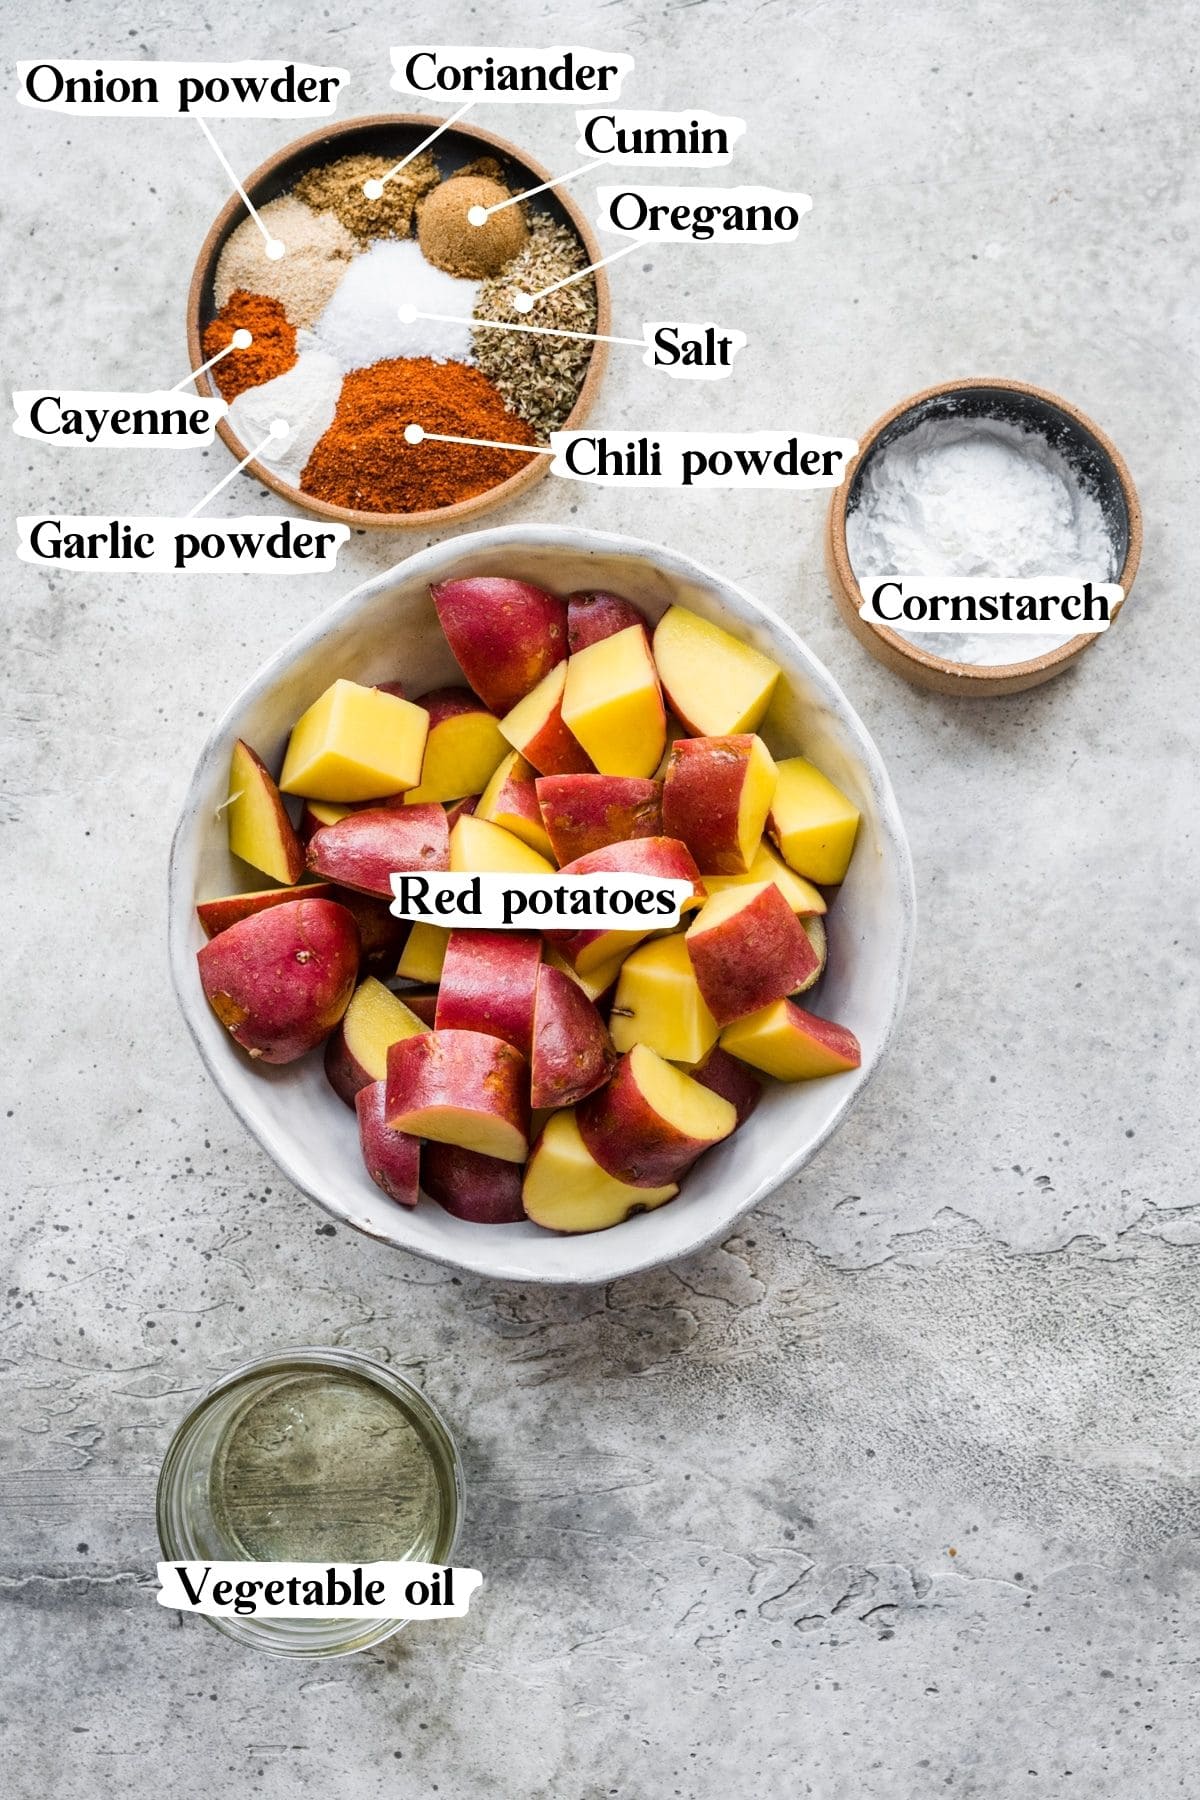 Overhead view of Mexican potato ingredients, including red potatoes and spices.